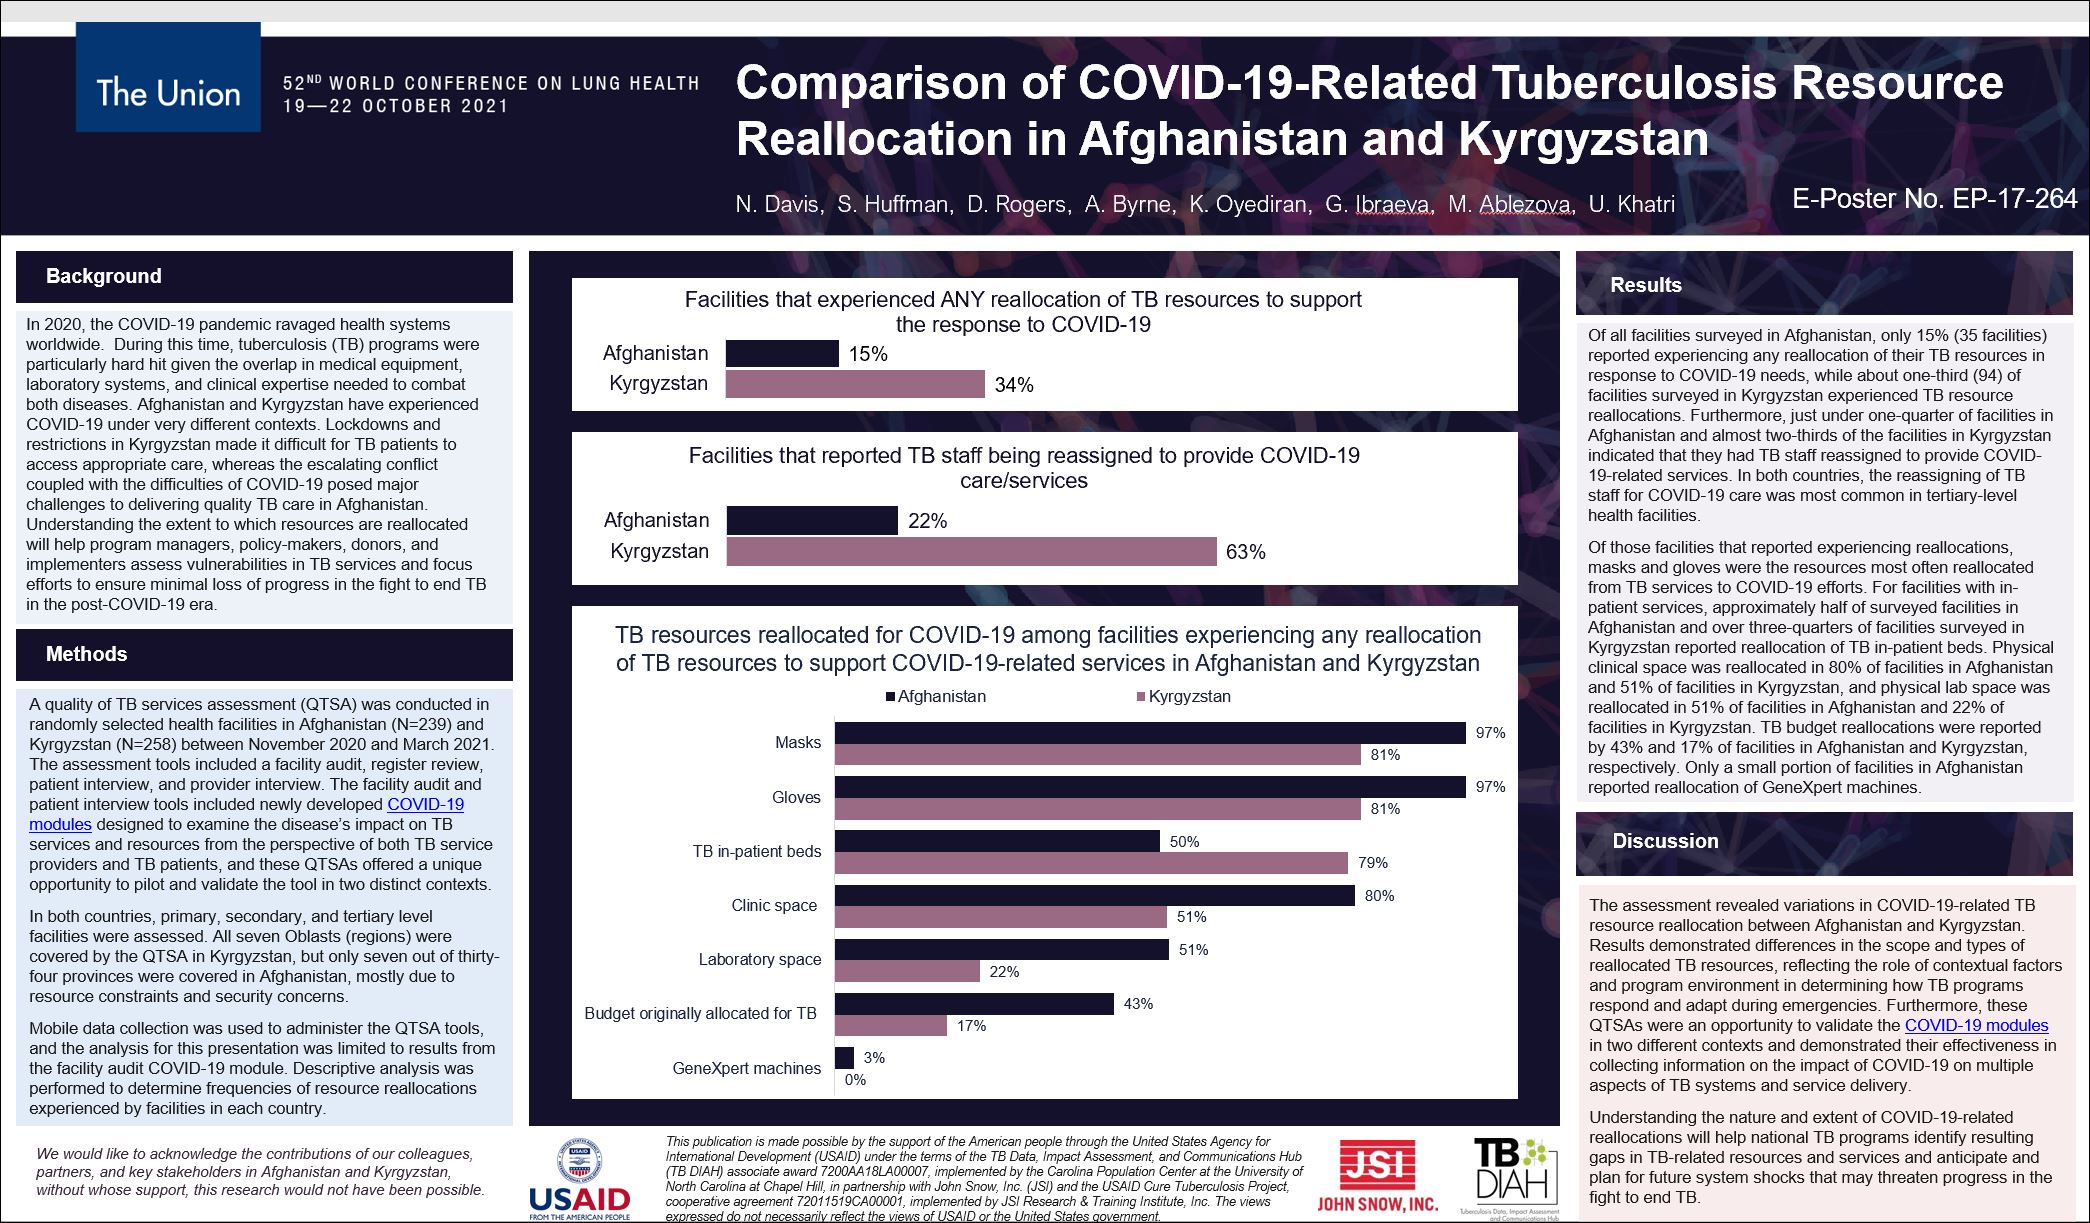 Comparison of COVID-19-Related Tuberculosis Resource Reallocation in Afghanistan and Kyrgyzstan